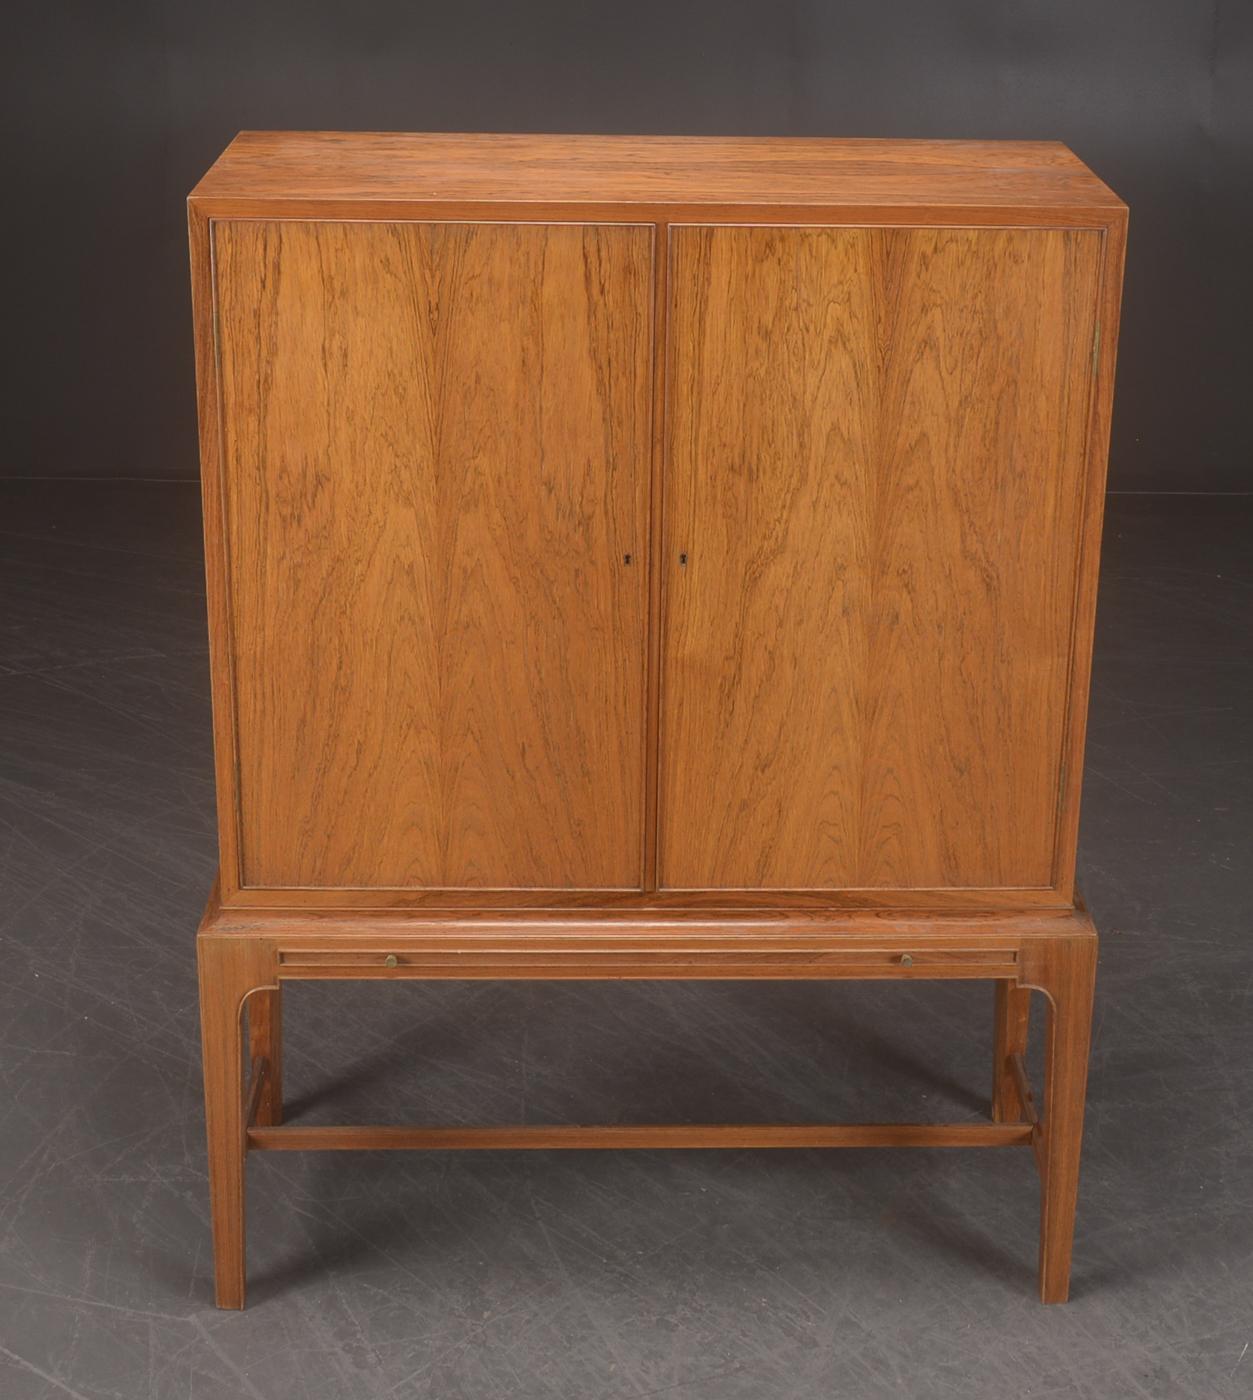 Danish rosewood dry bar cabinet, manufactured by C.B. Hansen in style of Kaare Klint.
Right side has two glass shelves. Back wall and sides are made off small square mirrors.
Left side has 3 shelves and 2 drawers.

Cabinet doors have unique